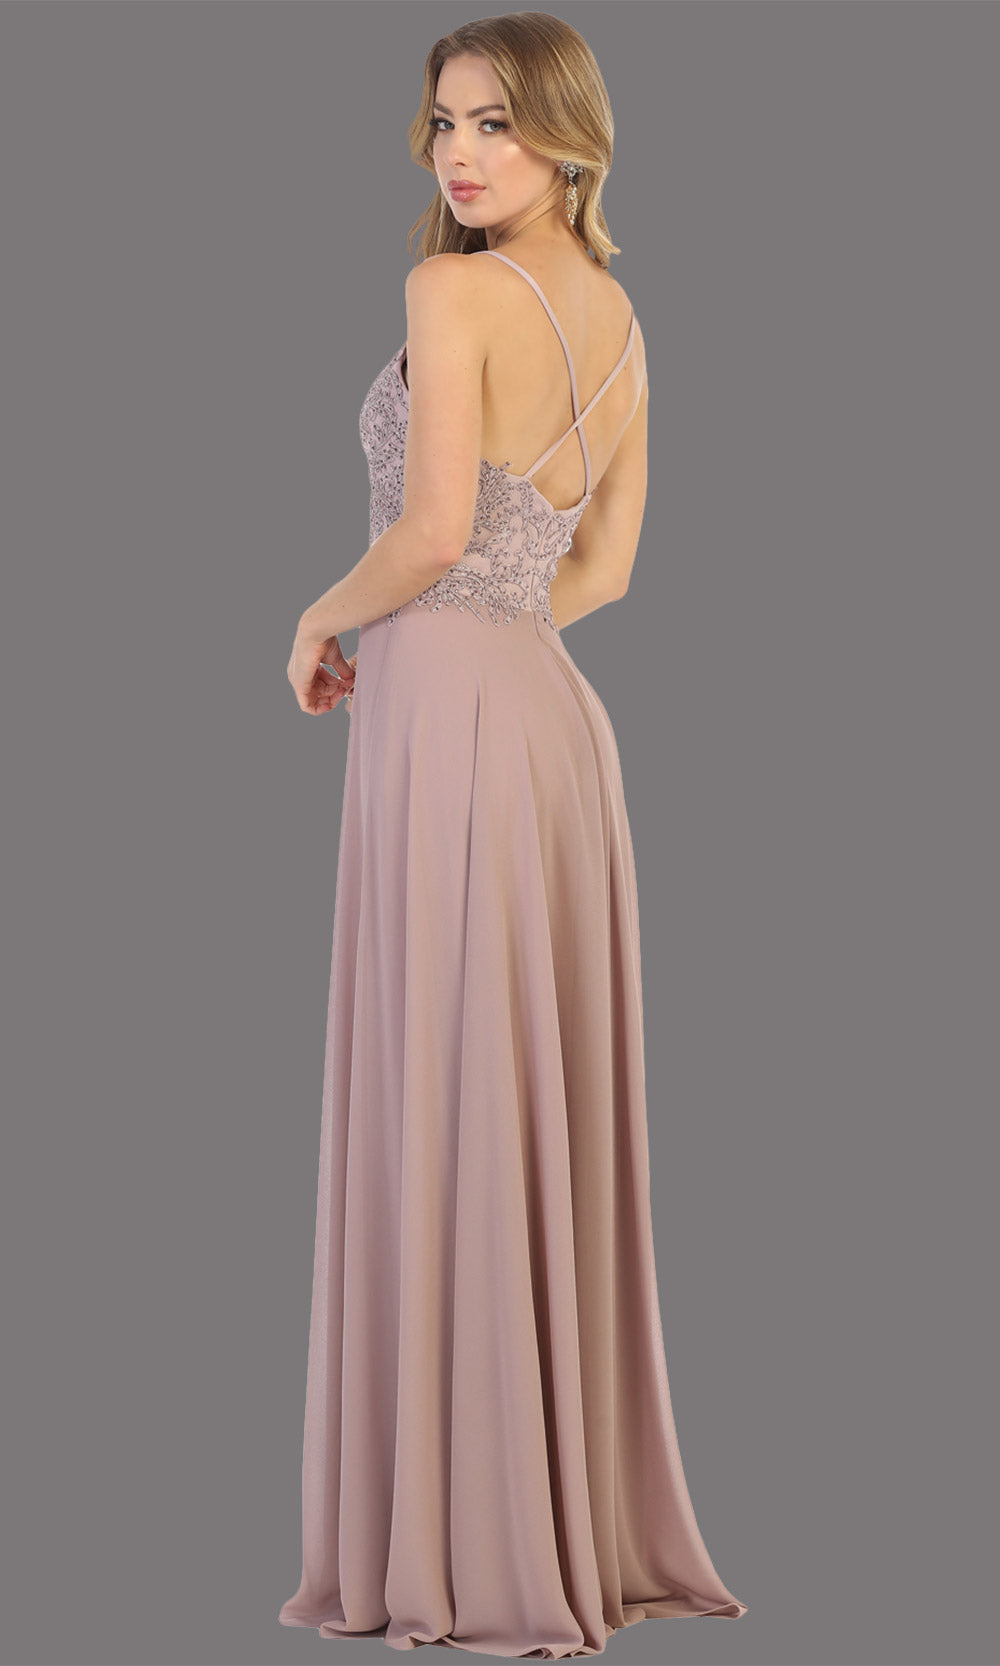 Mayqueen MQ1750 long mauv flowy sleek & sexy dress w/straps. This dusty rose dress is perfect for bridesmaid dresses, simple wedding guest dress, prom dress, gala, black tie wedding. Plus sizes are available, evening party dress-b.jpg